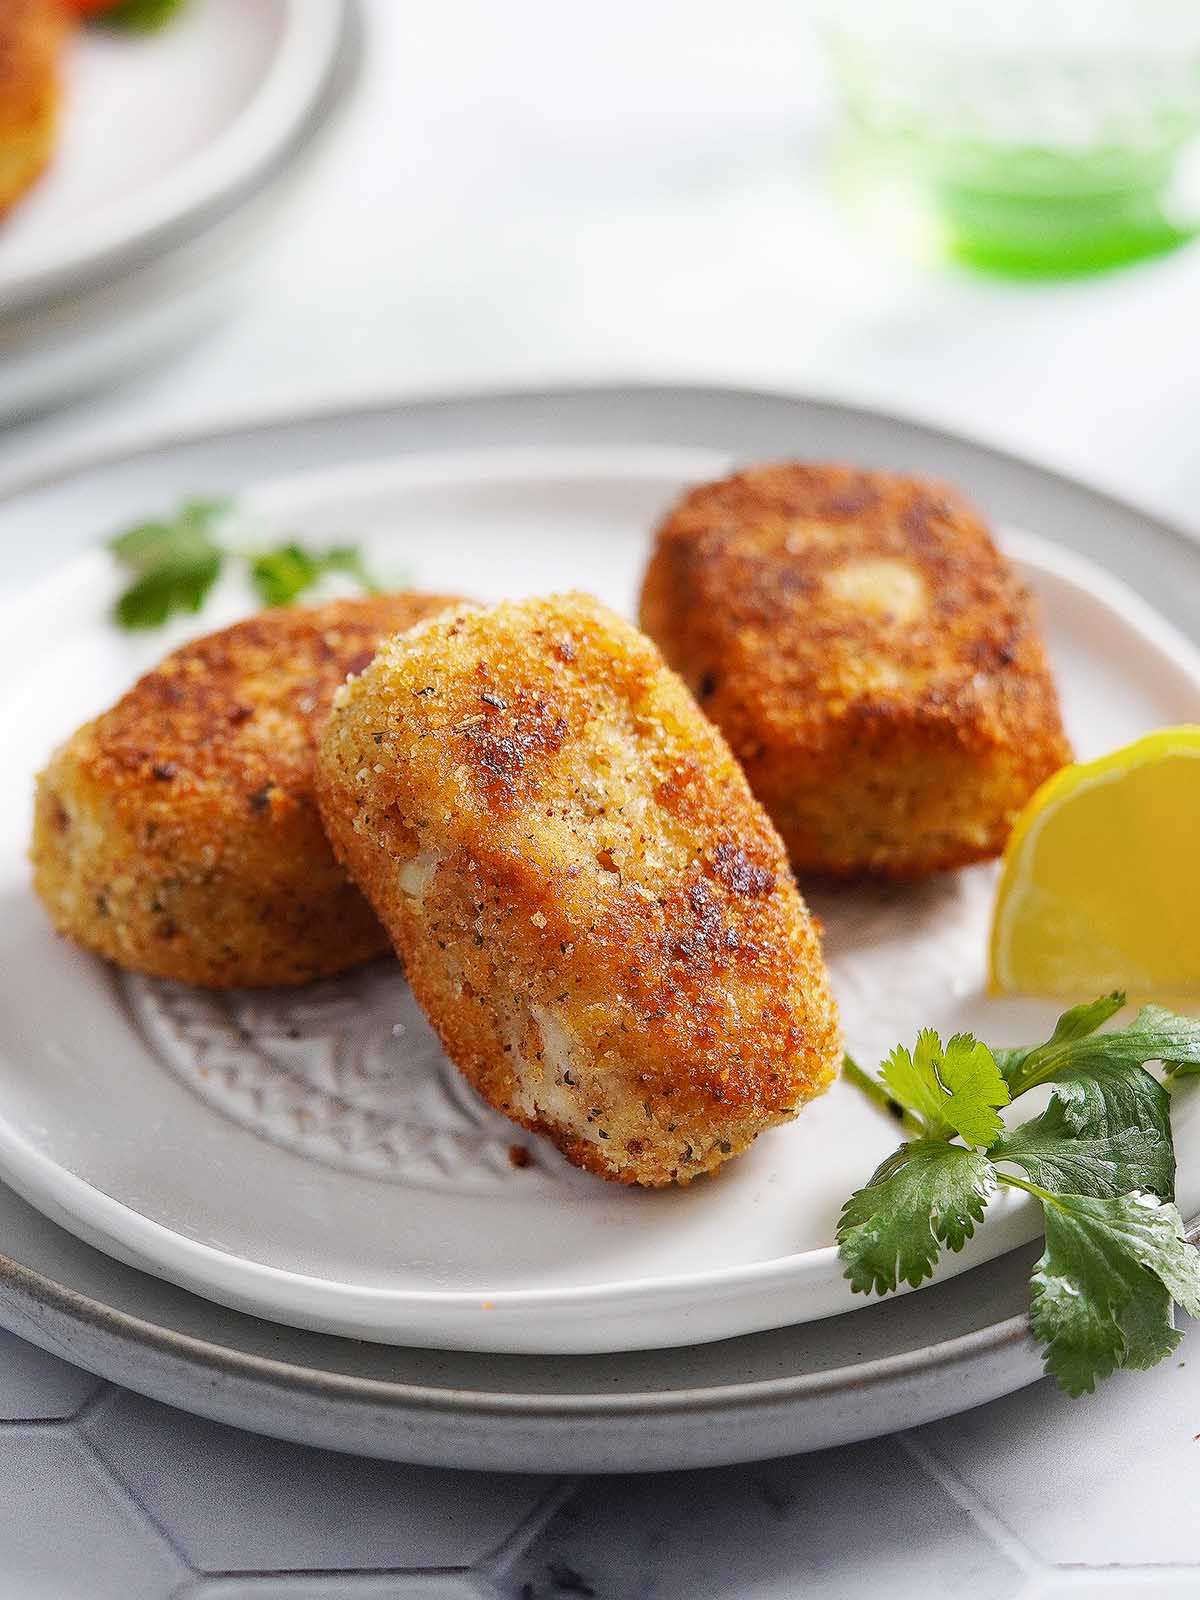 3 croquetas de atun on a white plate with a lemon on the side.